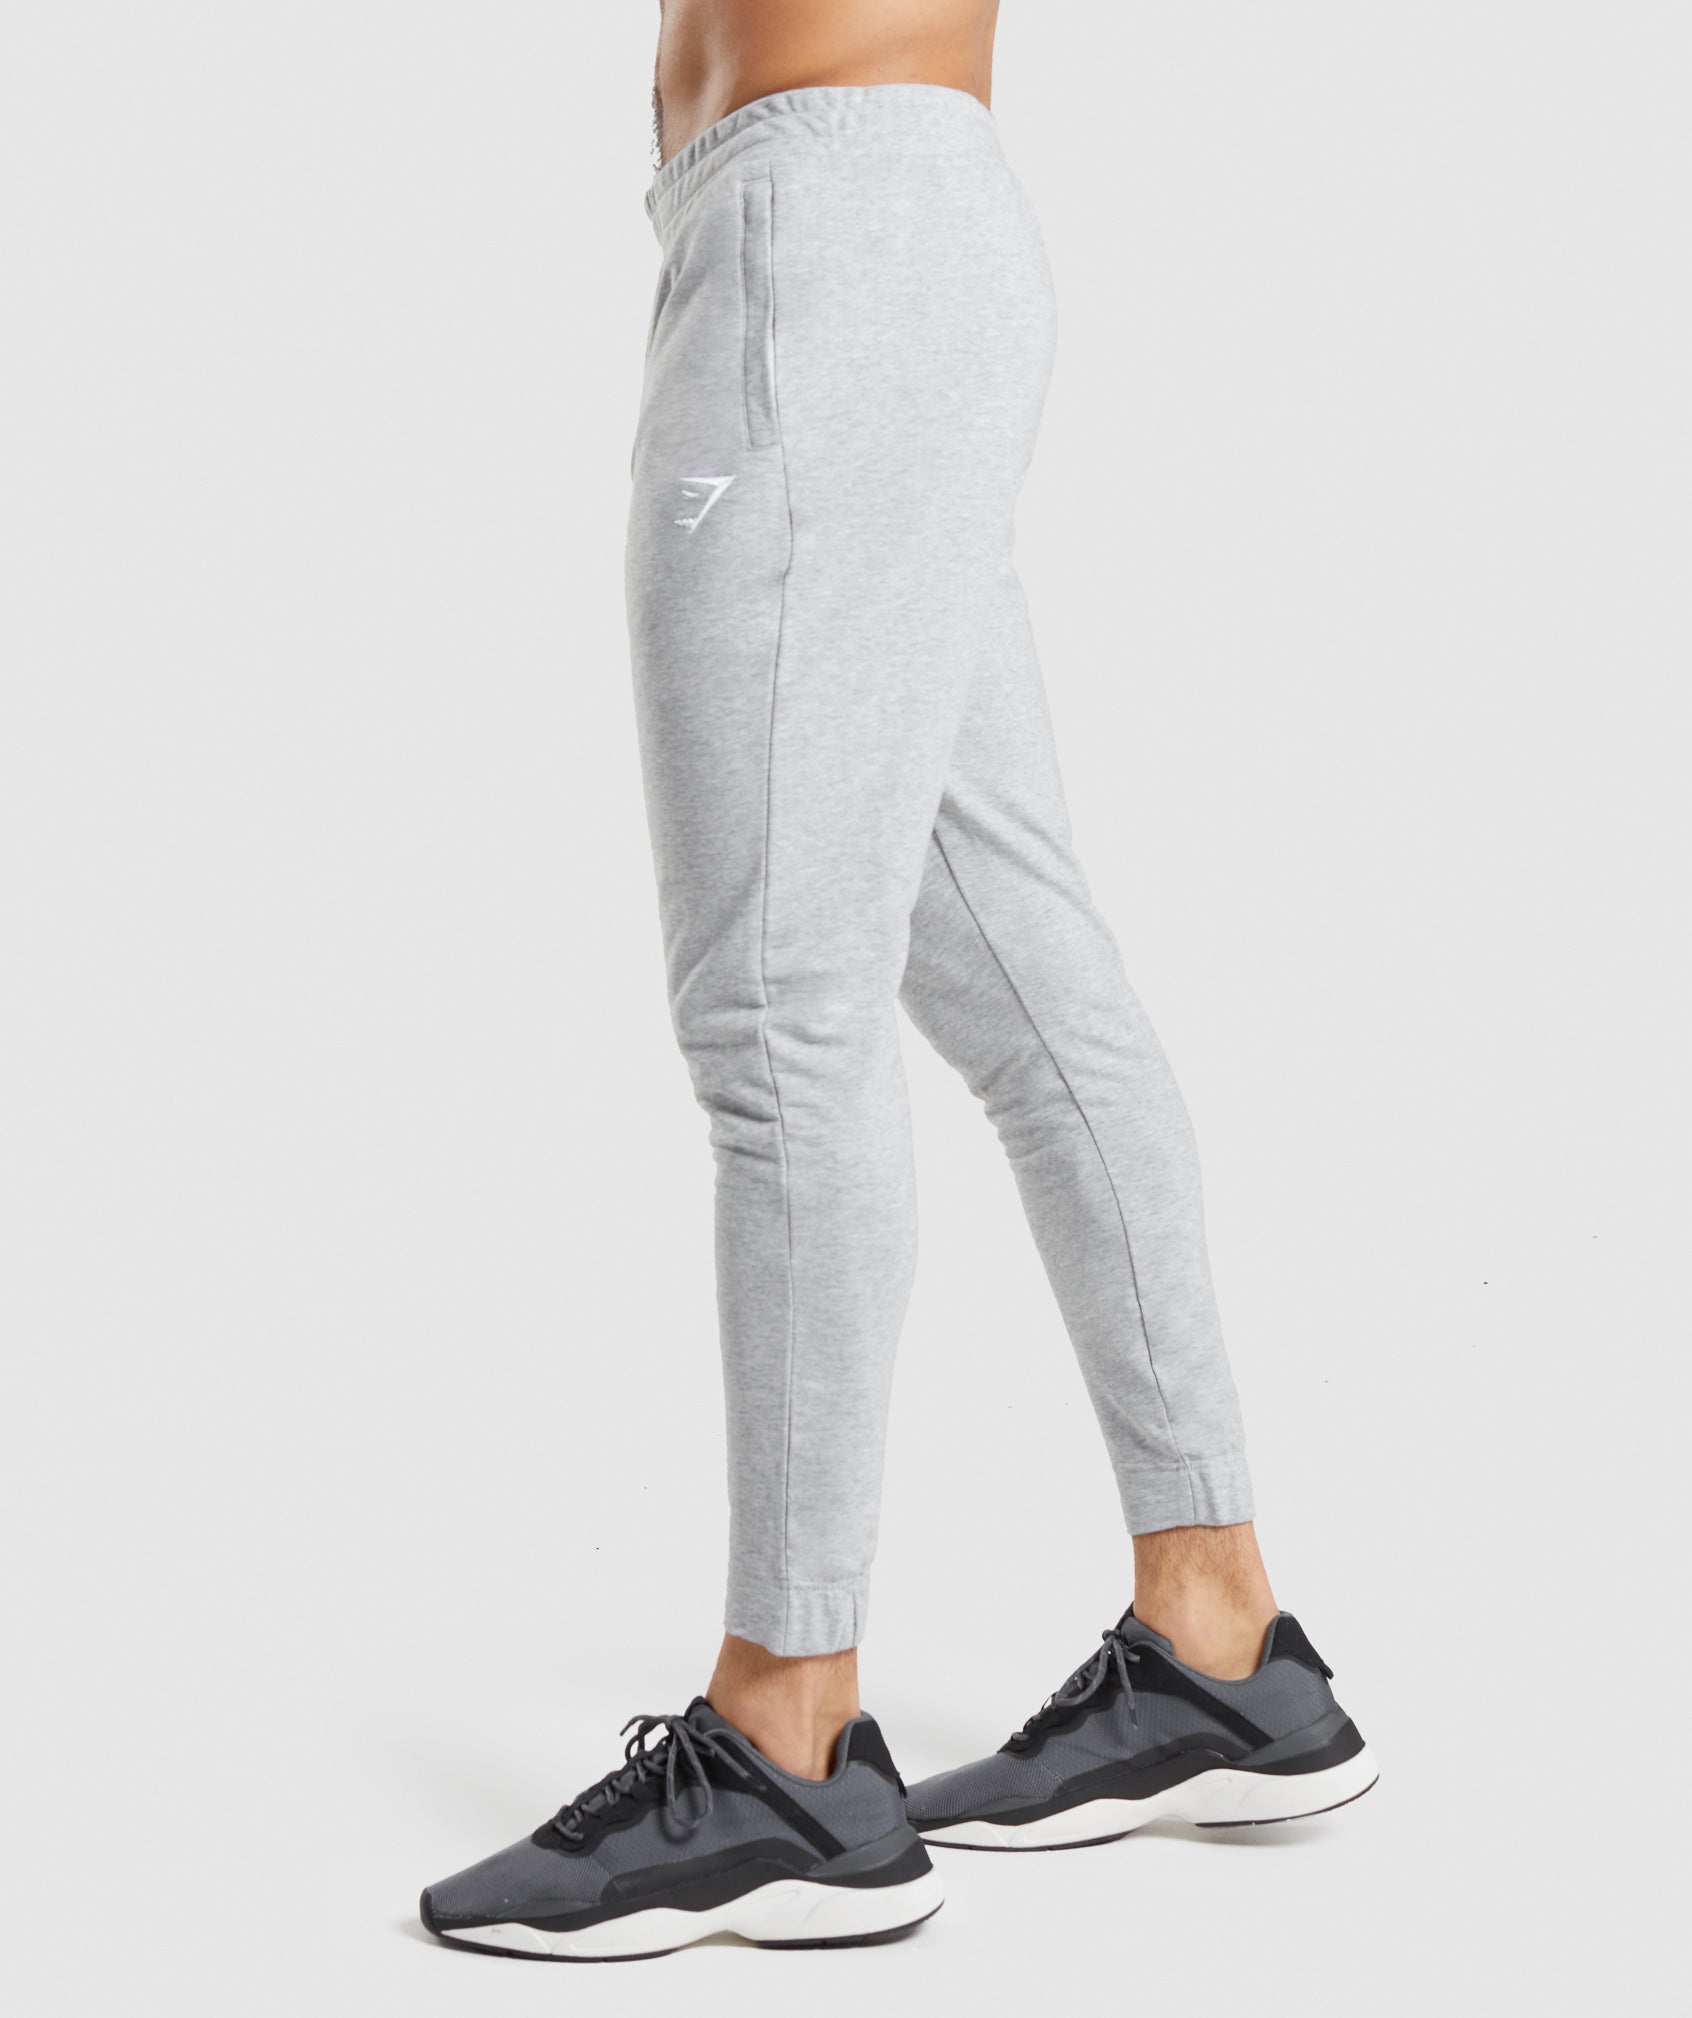 Critical 2.0 Joggers in Light Grey Marl - view 3